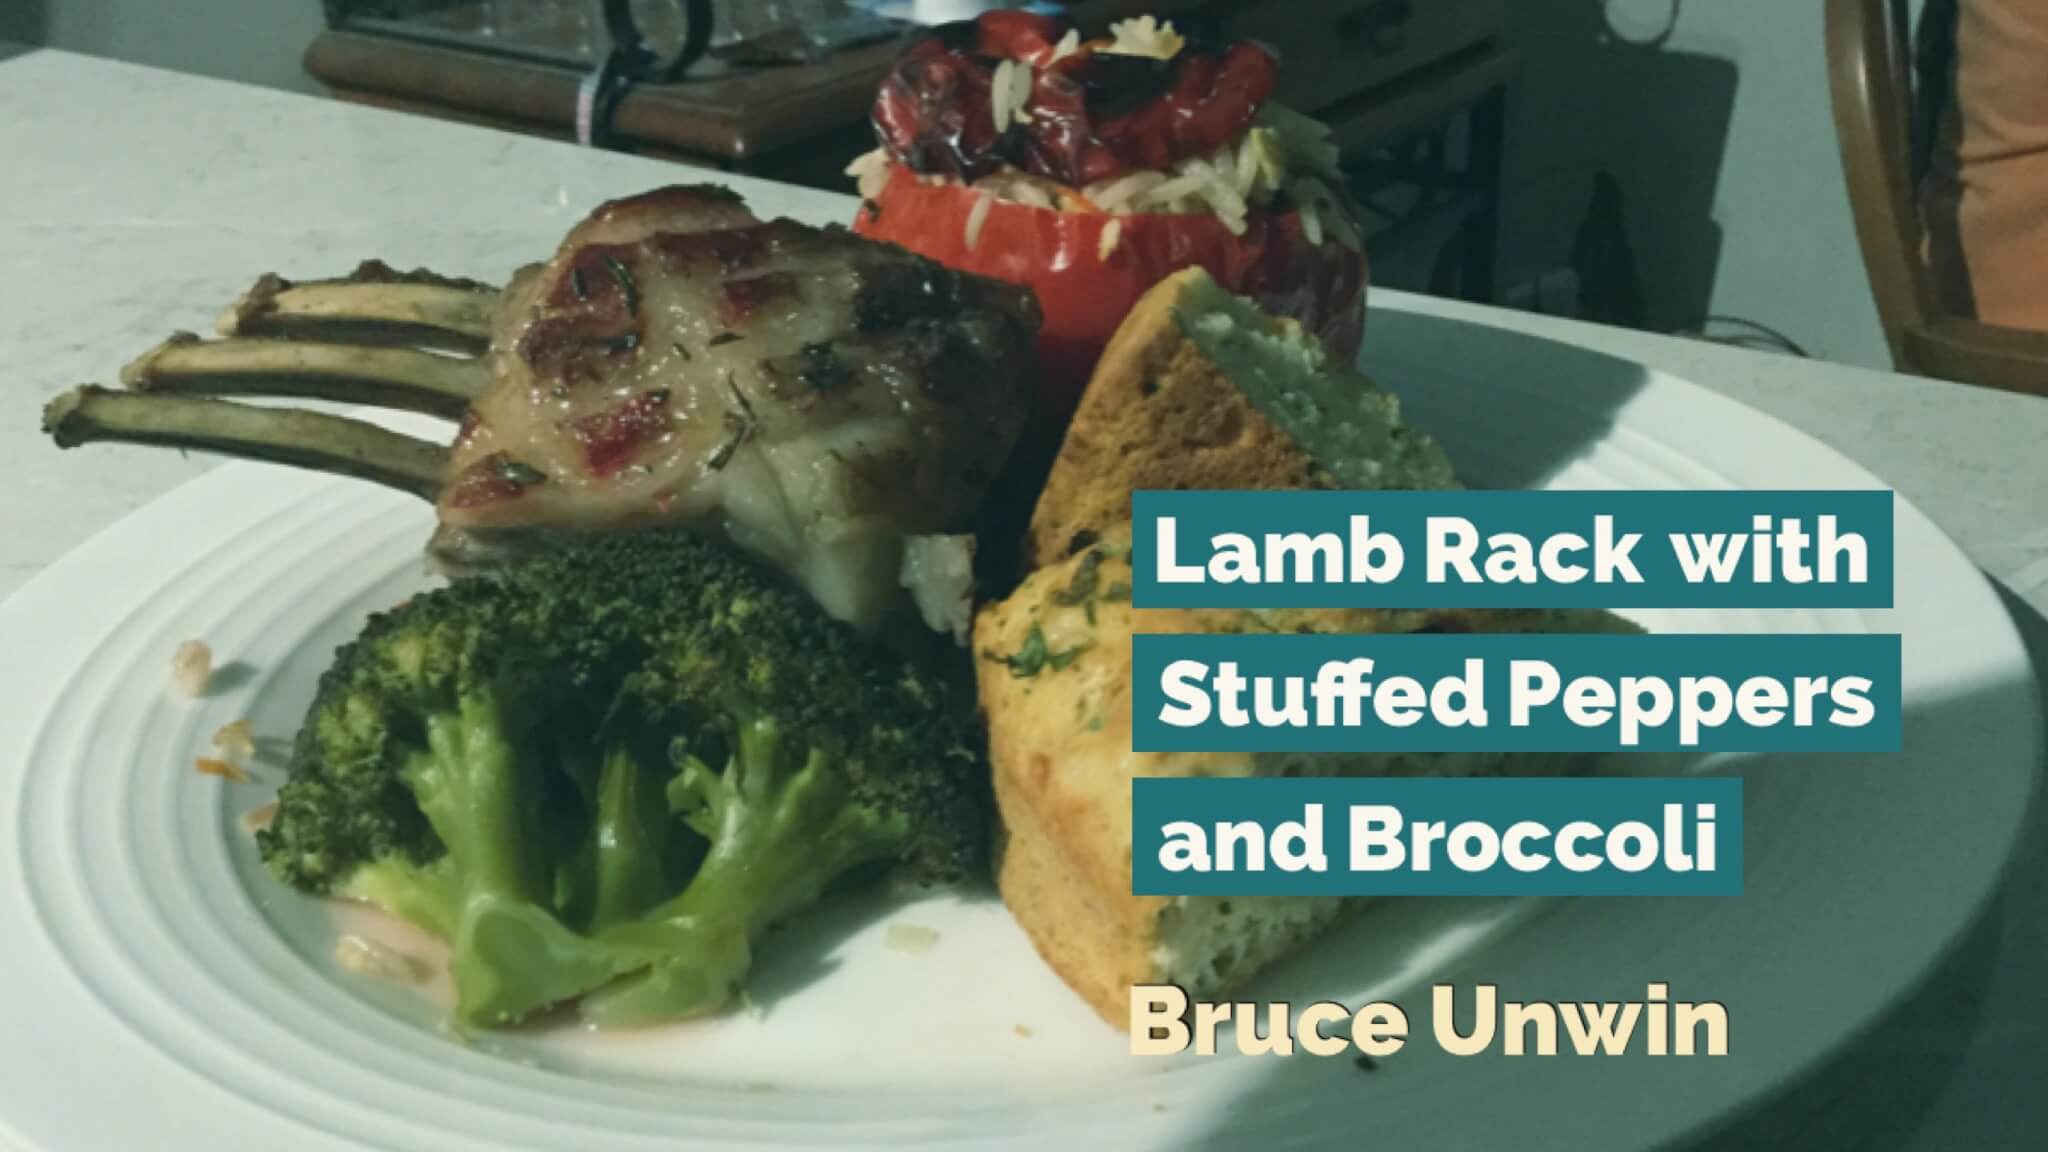 Lamb Rack with Stuffed Peppers and Broccoli